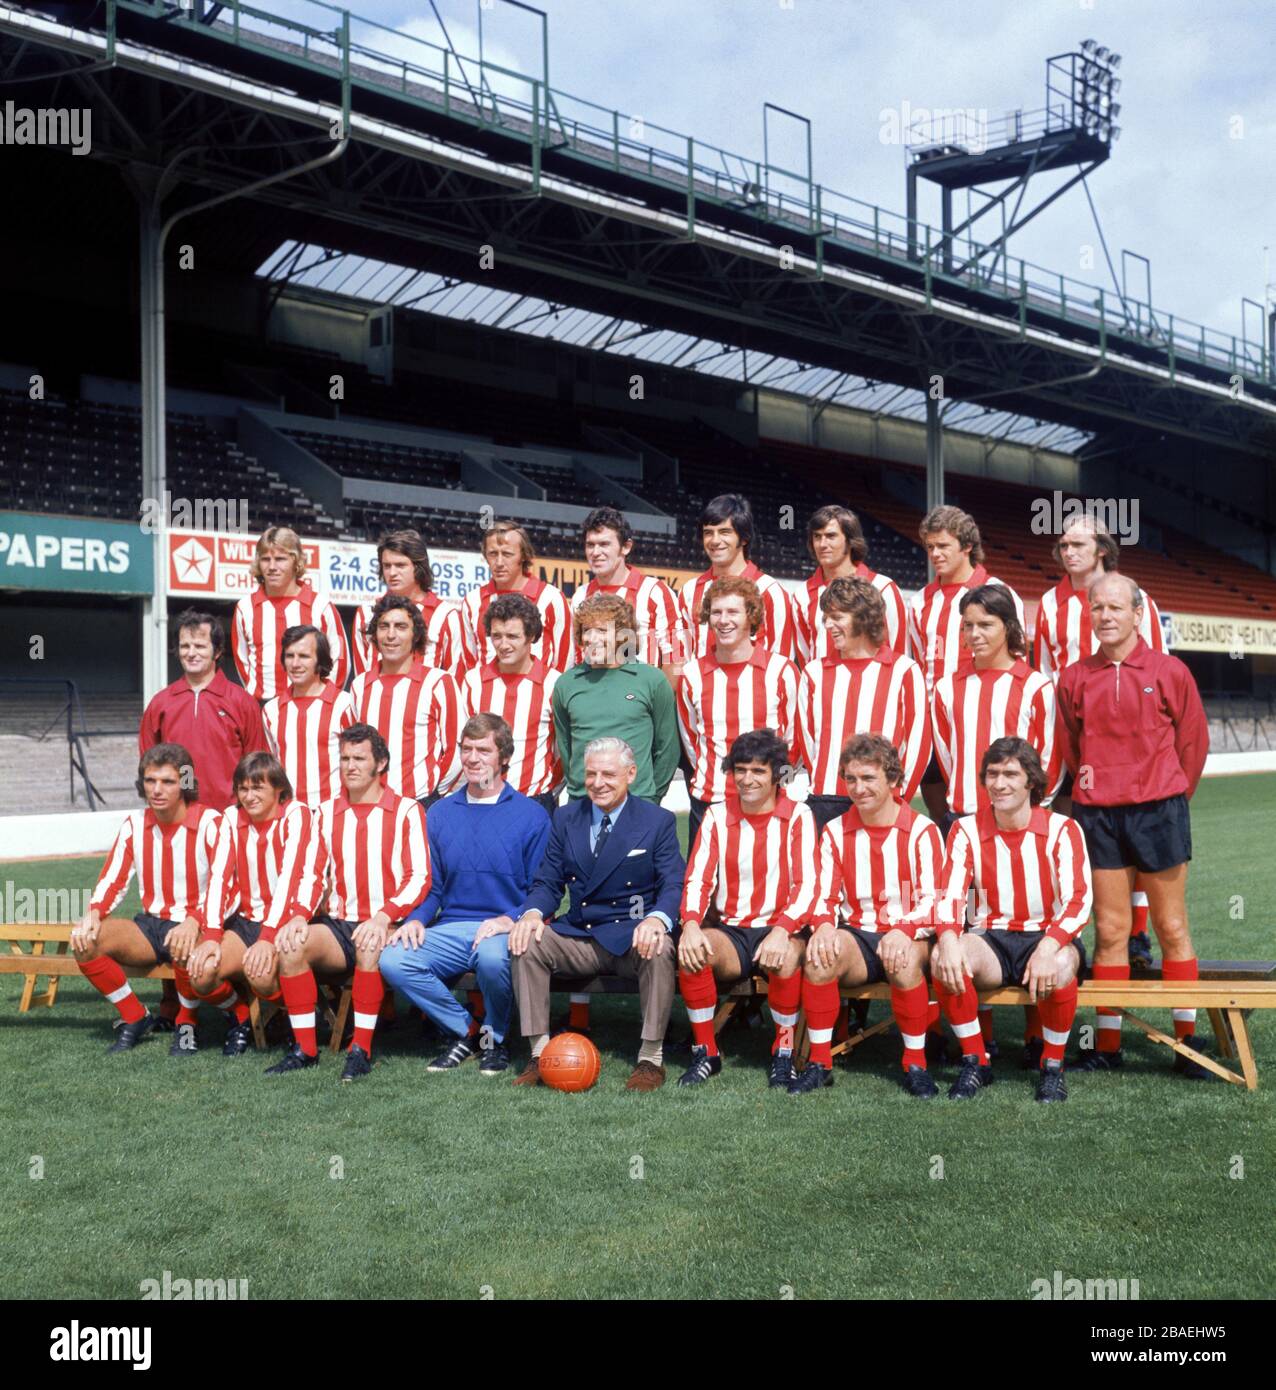 Southampton squad 1973-74: (back row, l-r) Billy Beaney, Alisdair McLeod, Joe Kirkup, John McGrath, Paul Bennett, Bob McCarthy, Wayne Talkes, Gerry O'Brien; (middle row, l-r) physio Don Taylor, Tony Byrne, David Walker, Paul Gilchrist, Eric Martin, Jim Steele, Mick Channon, Steve Mills, trainer George Horsefall; (front row, l-r) Terry Spinner, Bobby Stokes, Terry Paine, assistant manager Lawrie McMenemy, manager Ted Bates, Hugh Fisher, Brian O'Neil, Francis Burns Stock Photo